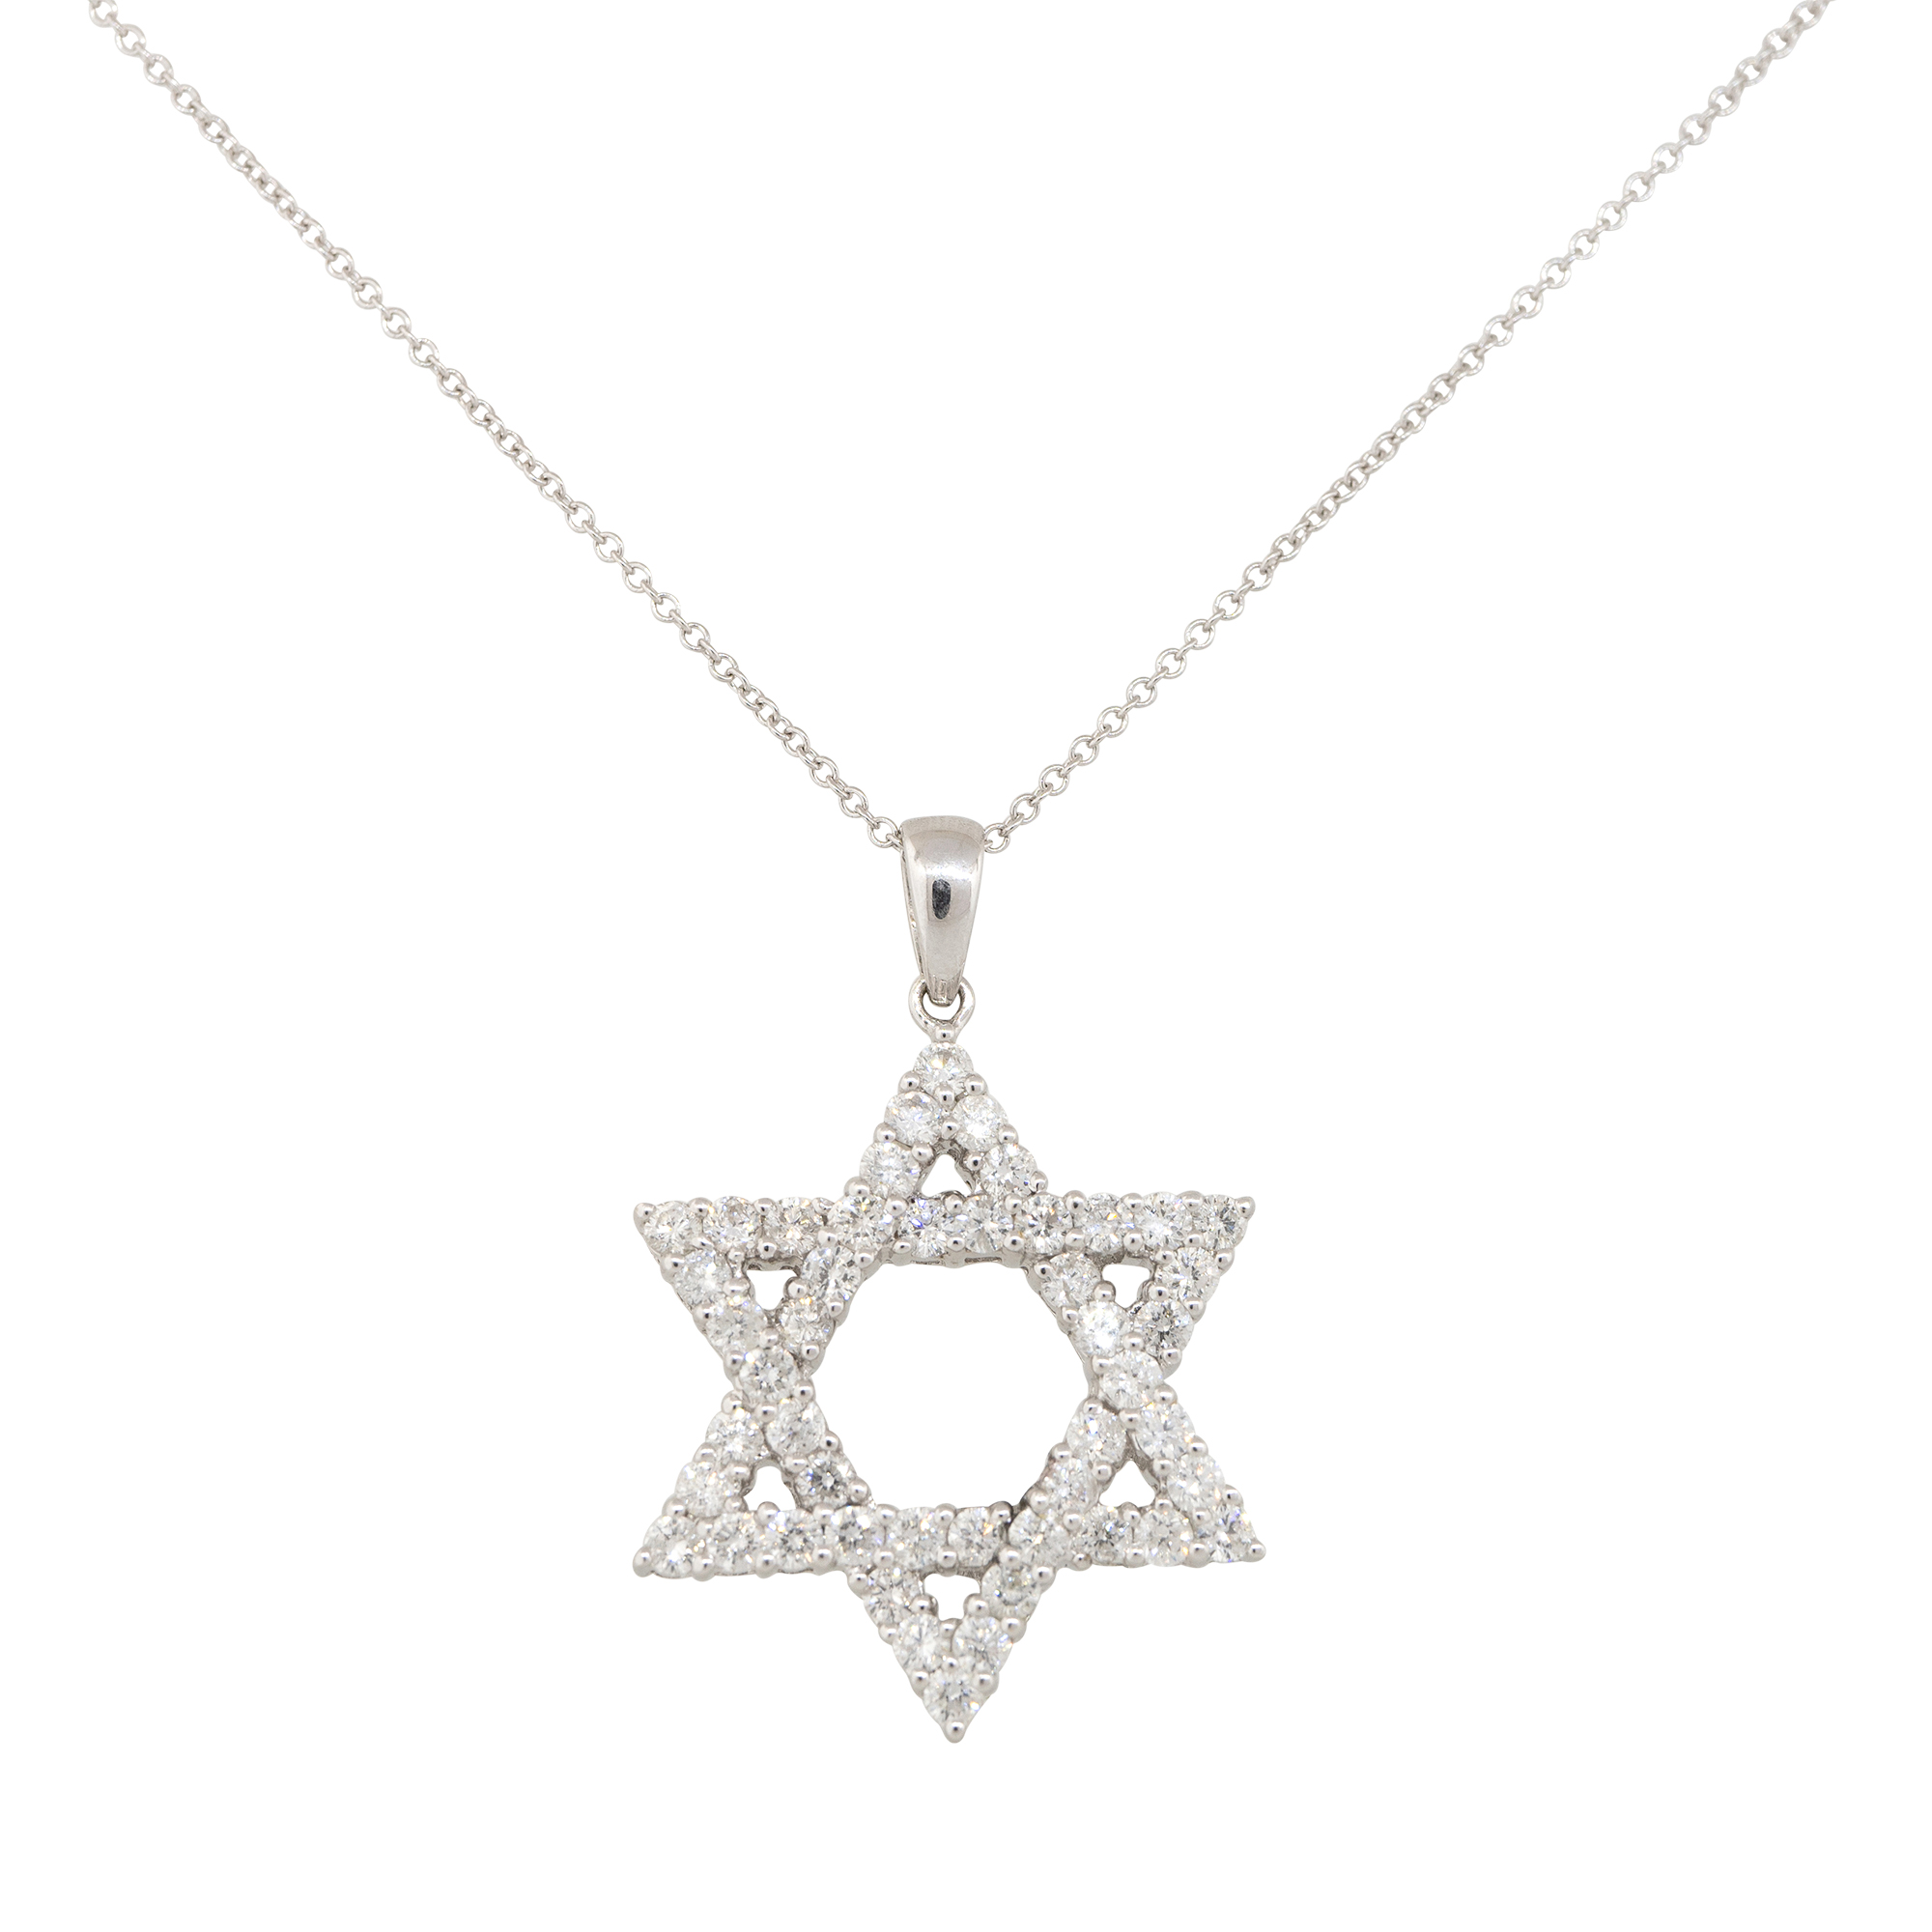 Roberto Coin 18K White Gold Star of David Pendant Necklace with Diamonds,  16